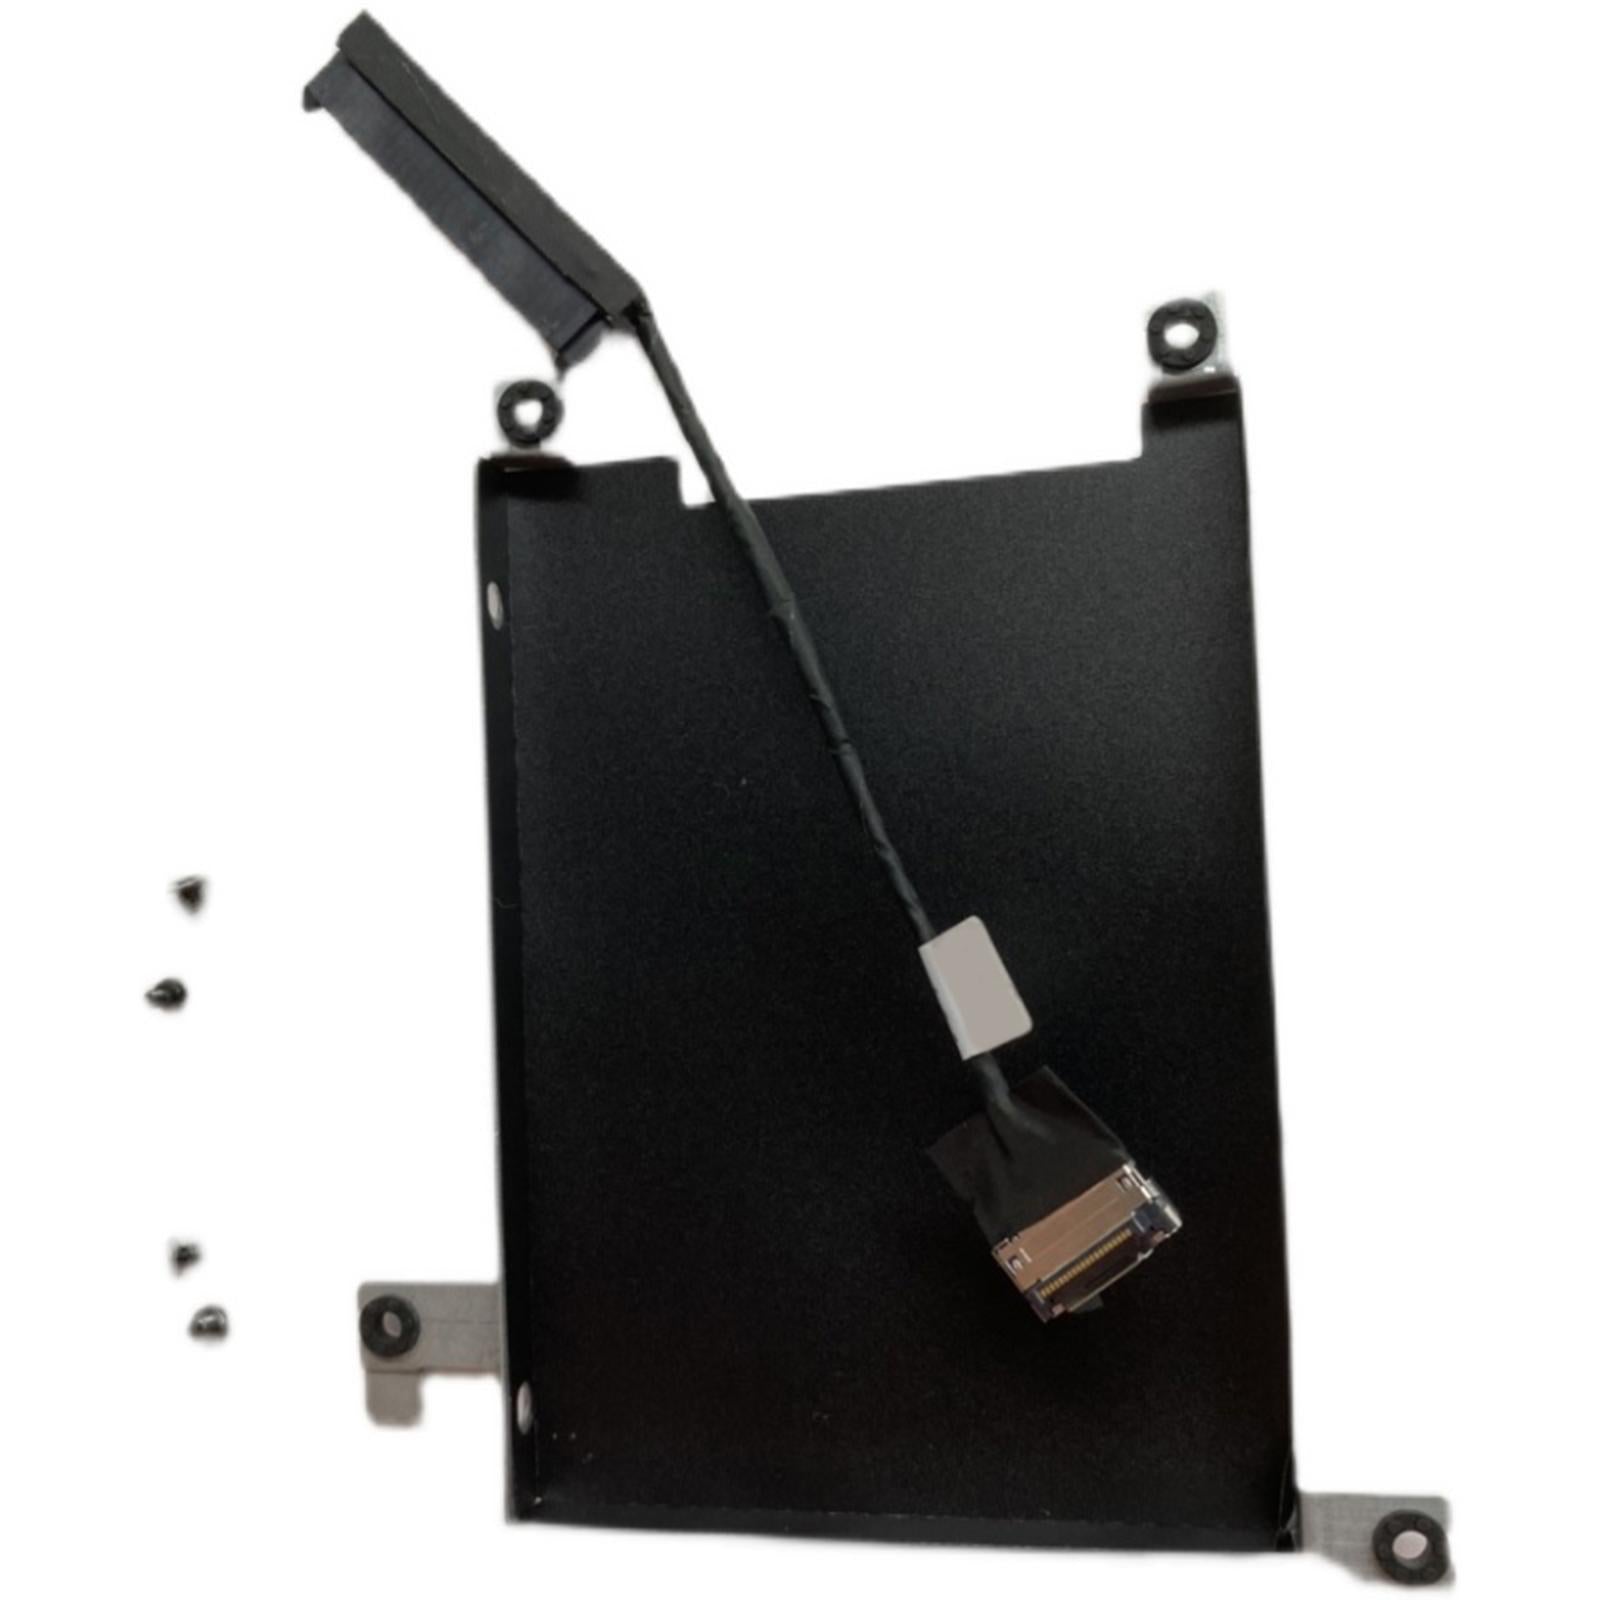 0ND8N9 ND8N9 Replacement Hard Drive Bracket for Dell Latitude 5502 5505